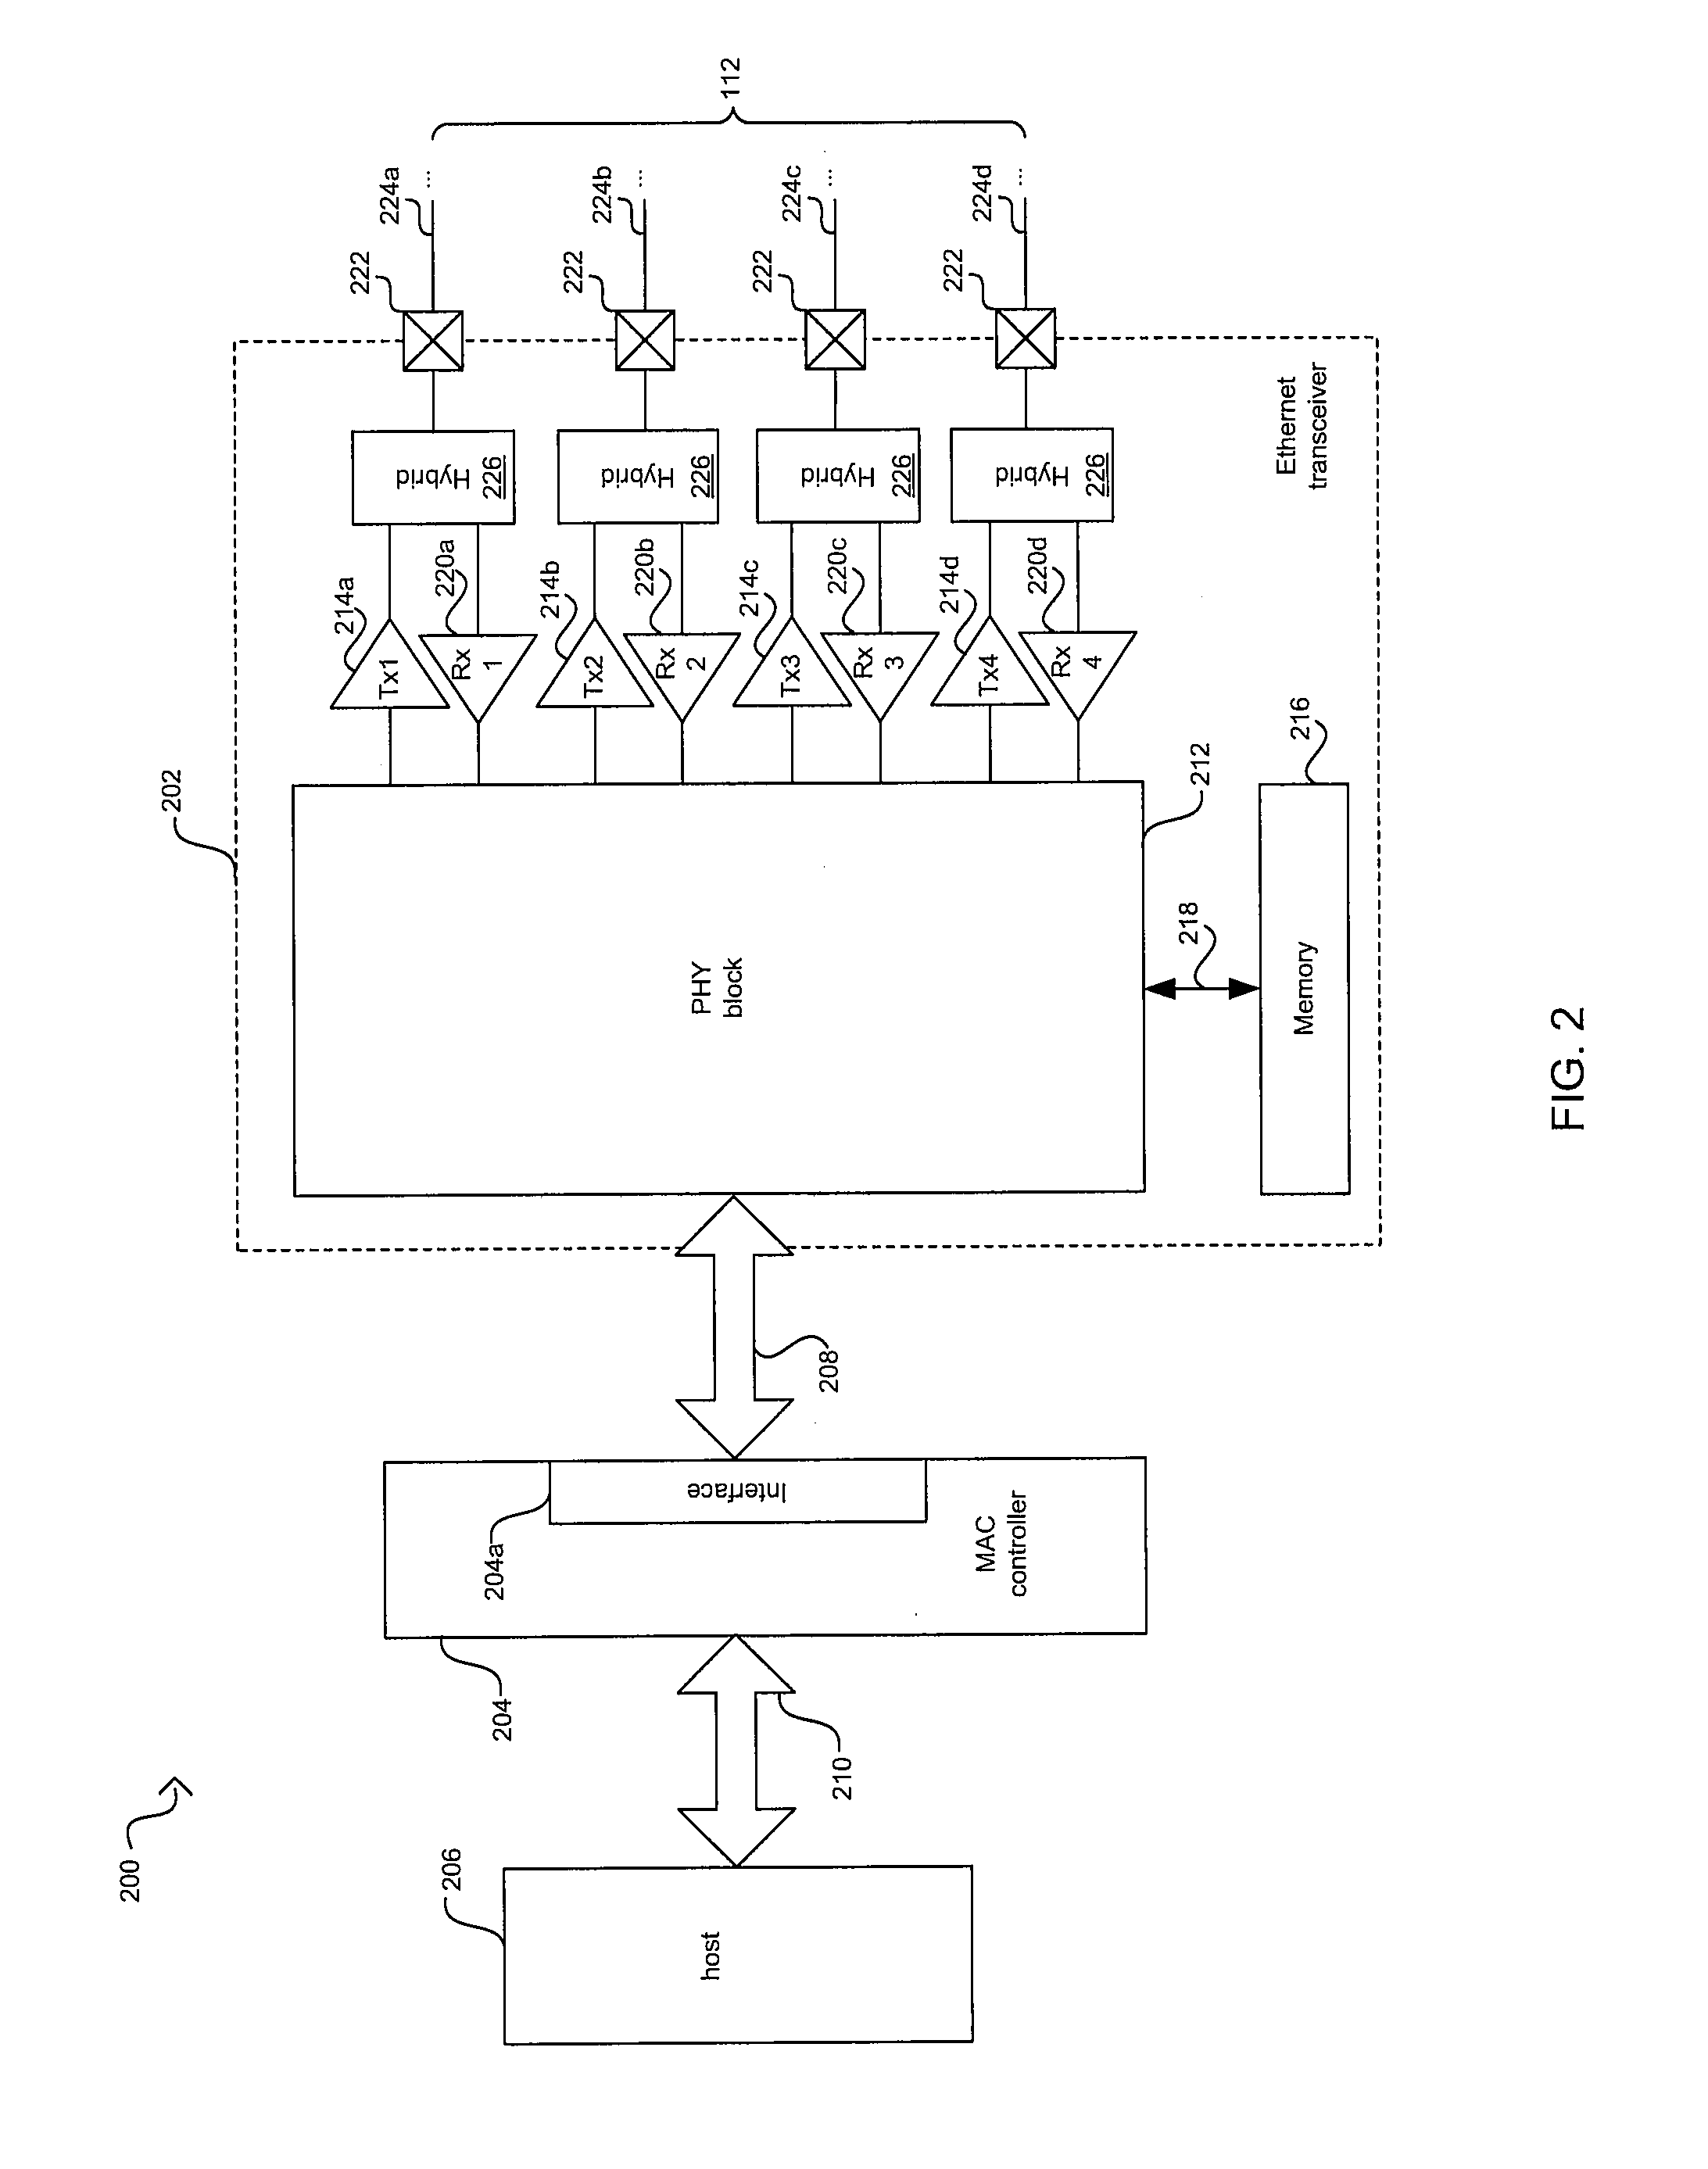 Method And System For Dynamically Determining When To Train Ethernet Link Partners To Support Energy Efficient Ethernet Networks